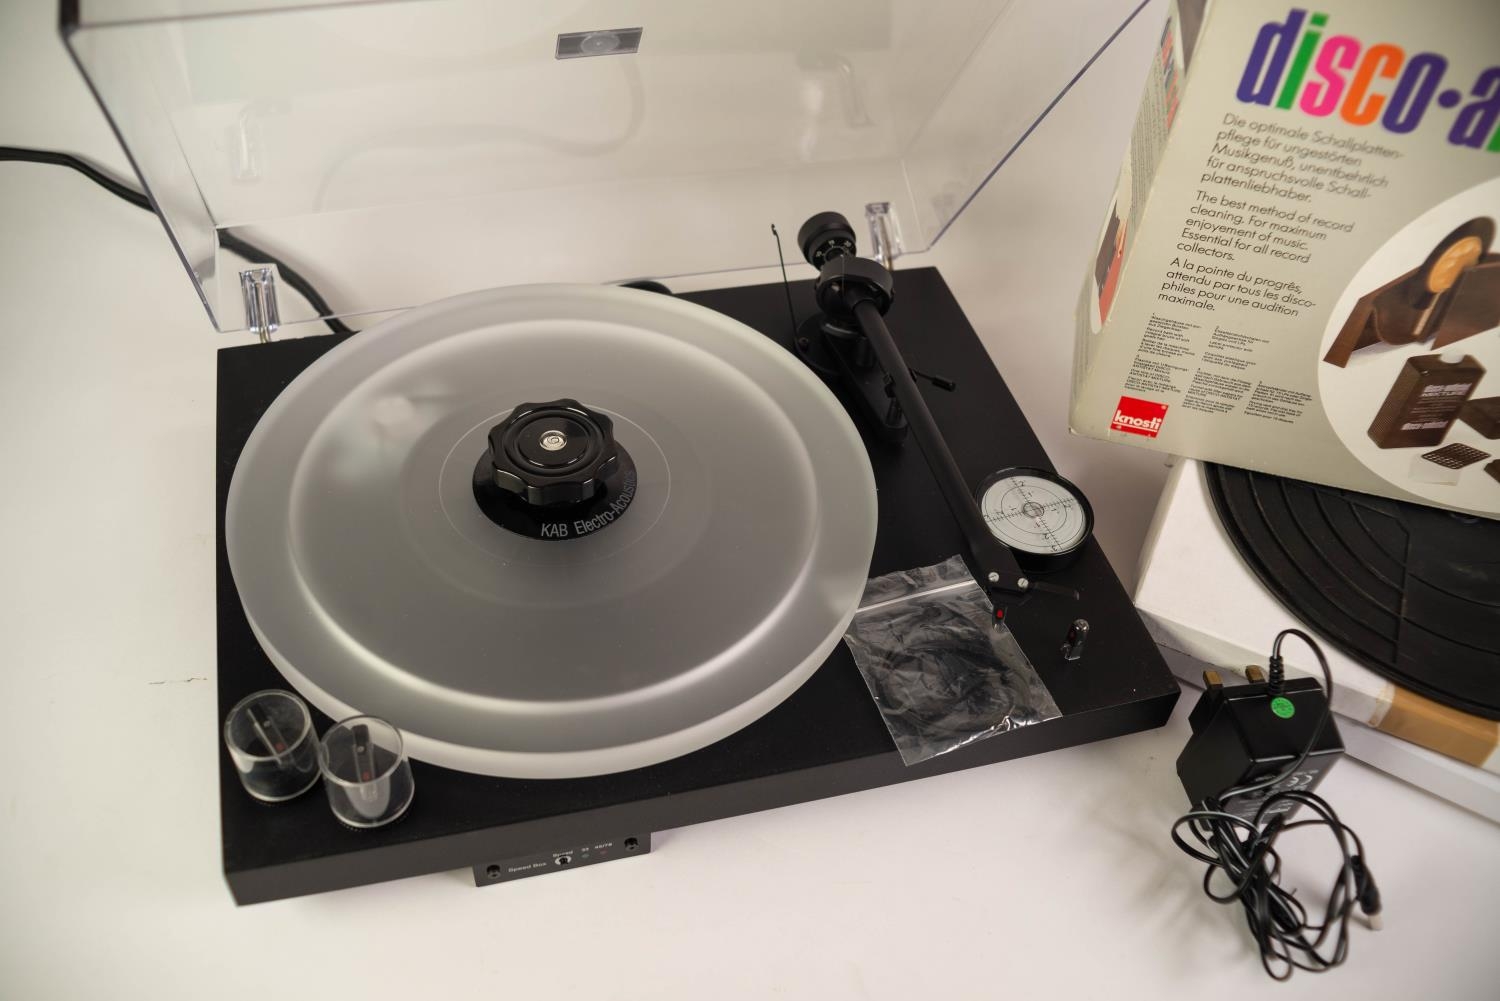 AUDIO EQUIPMENT. A Pro-Ject Record Player, Debut III Phono SB, boxed with cables, power supply, - Image 2 of 2